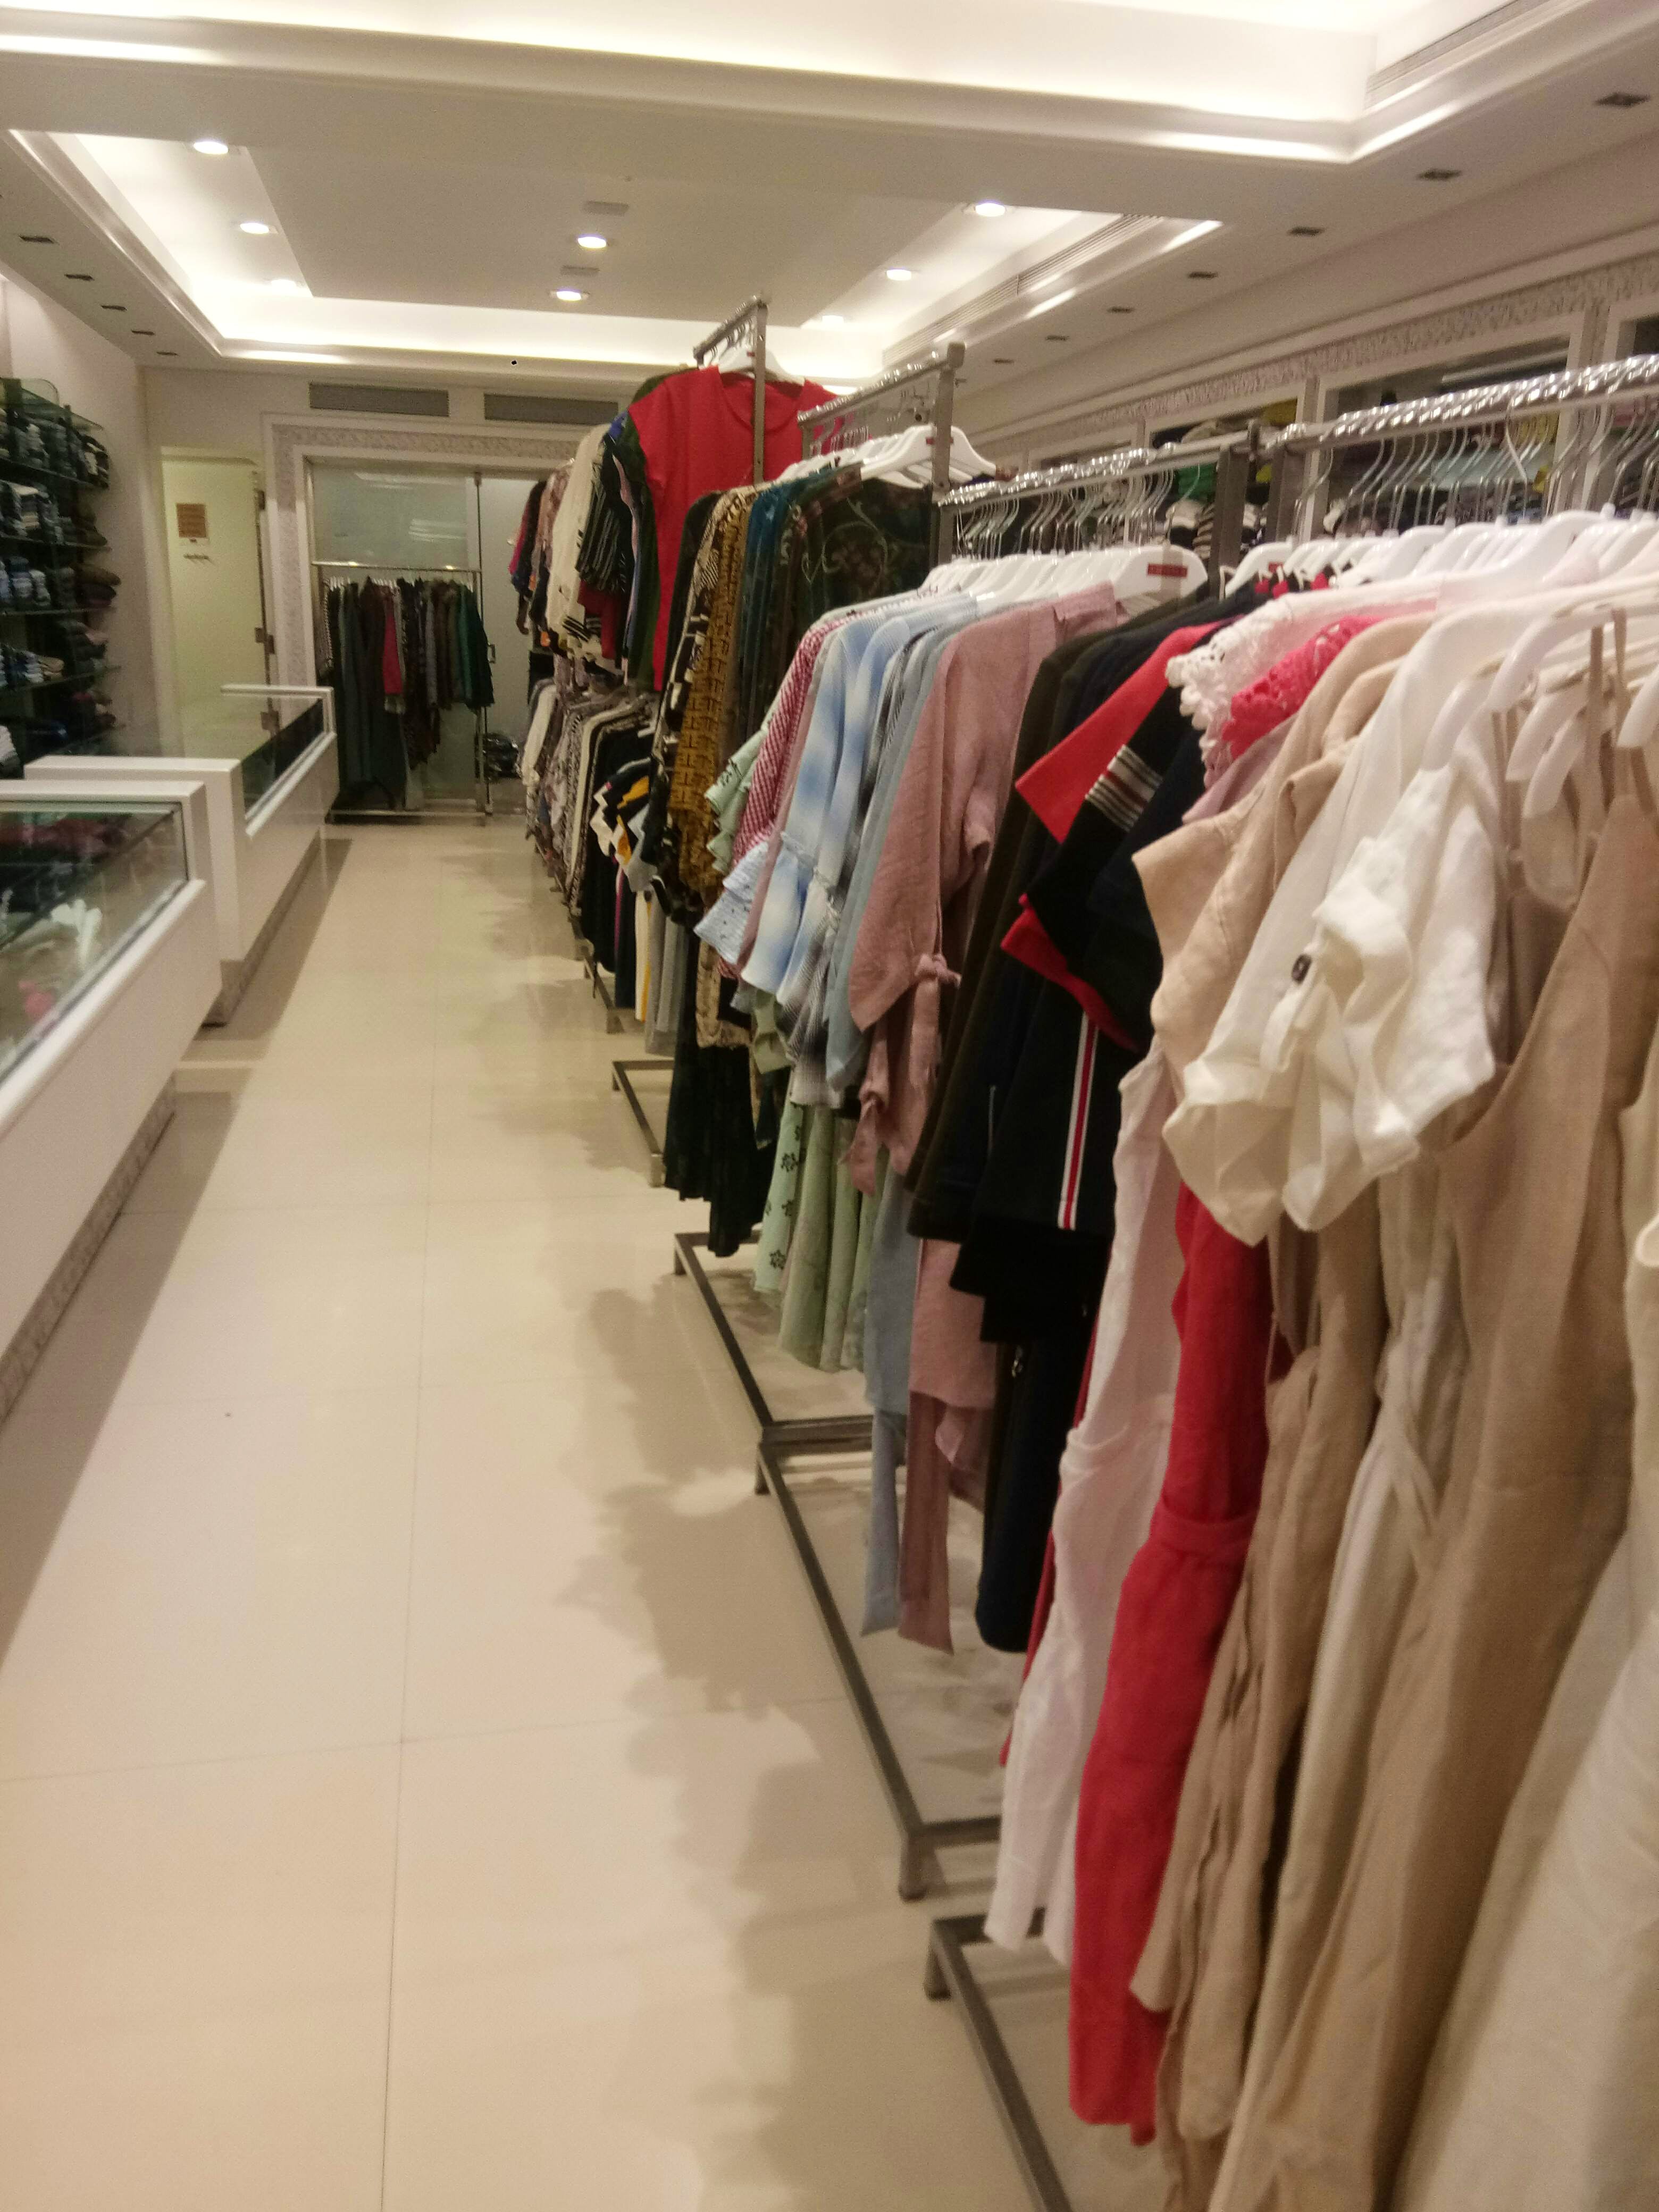 Boutique,Clothing,Outlet store,Closet,Room,Fashion,Aisle,Ceiling,Dress,Shopping